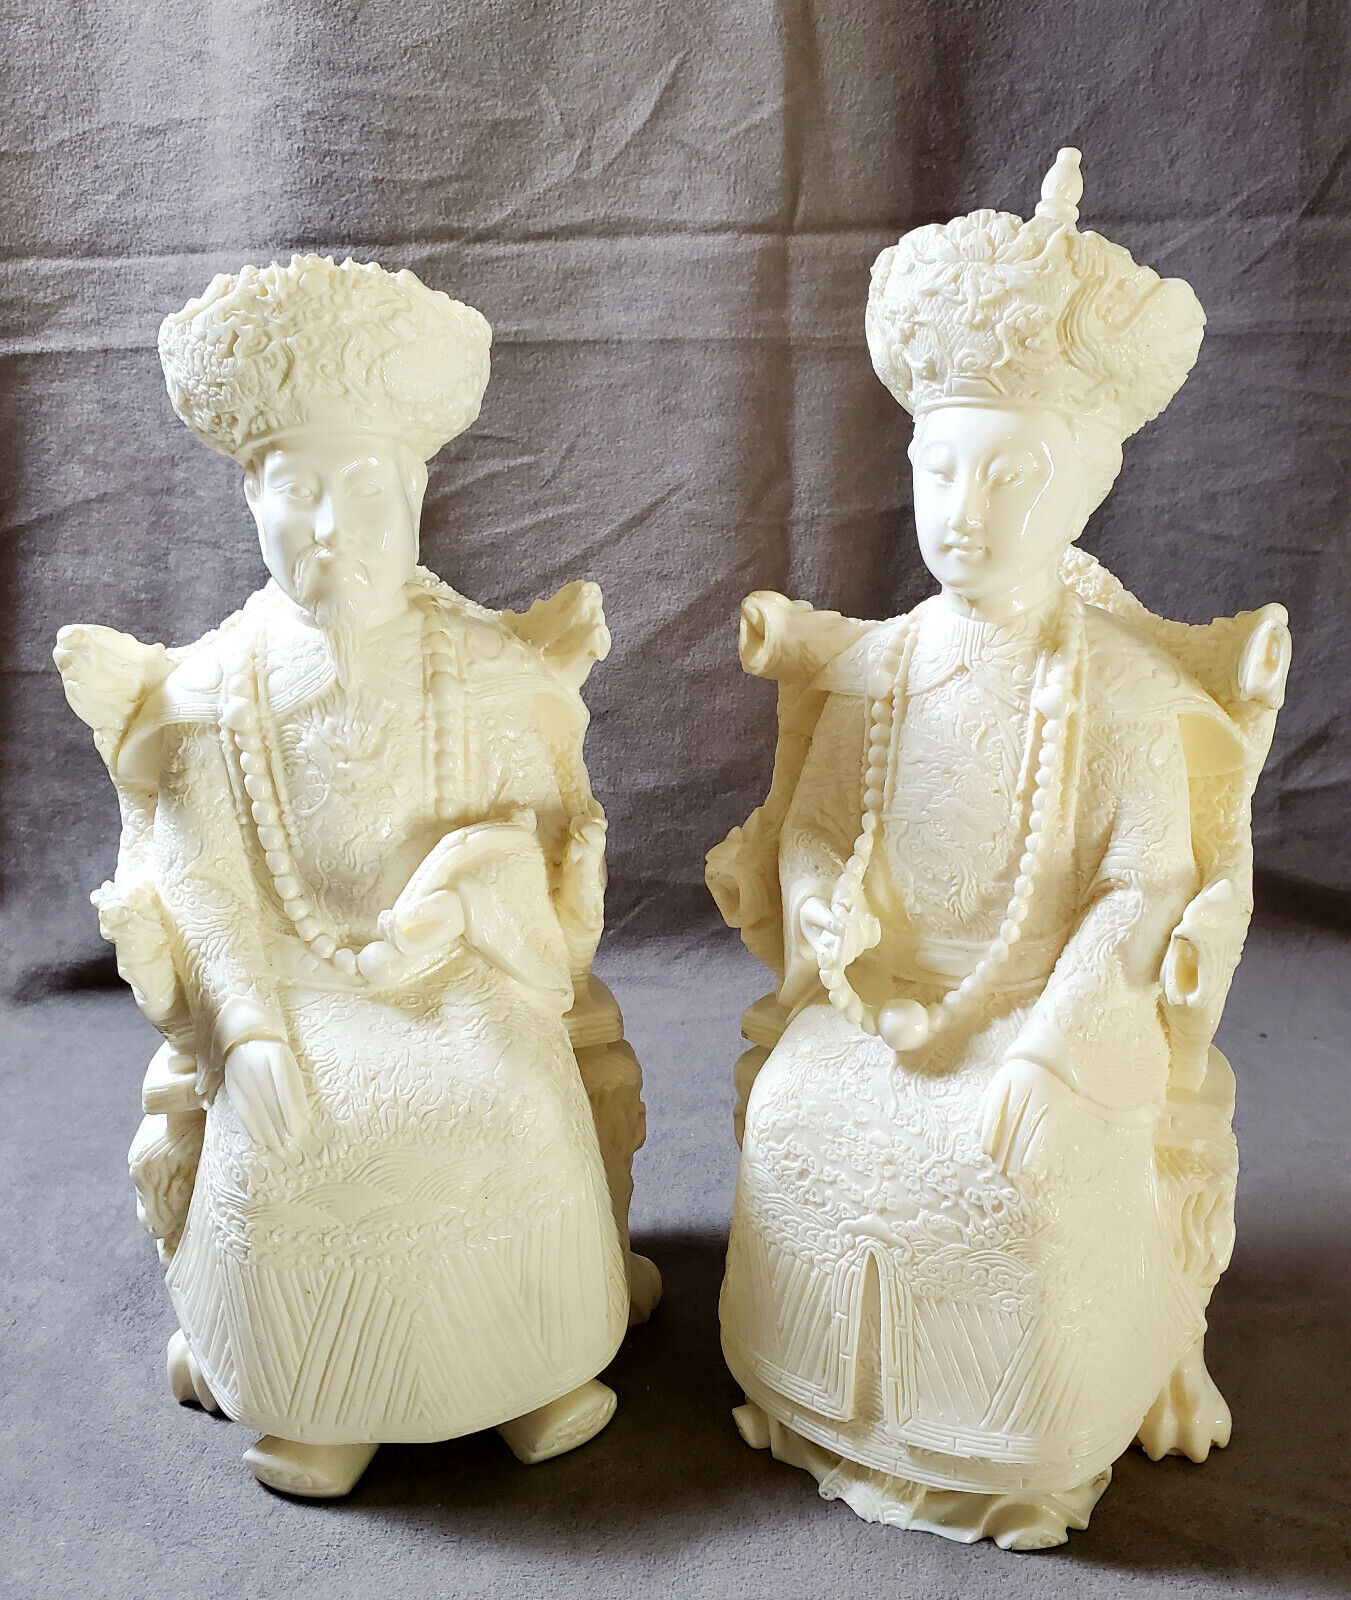 Chinese EMPEROR & EMPRESS Royal Figurine Pair Carved Resin Statue Sculpture